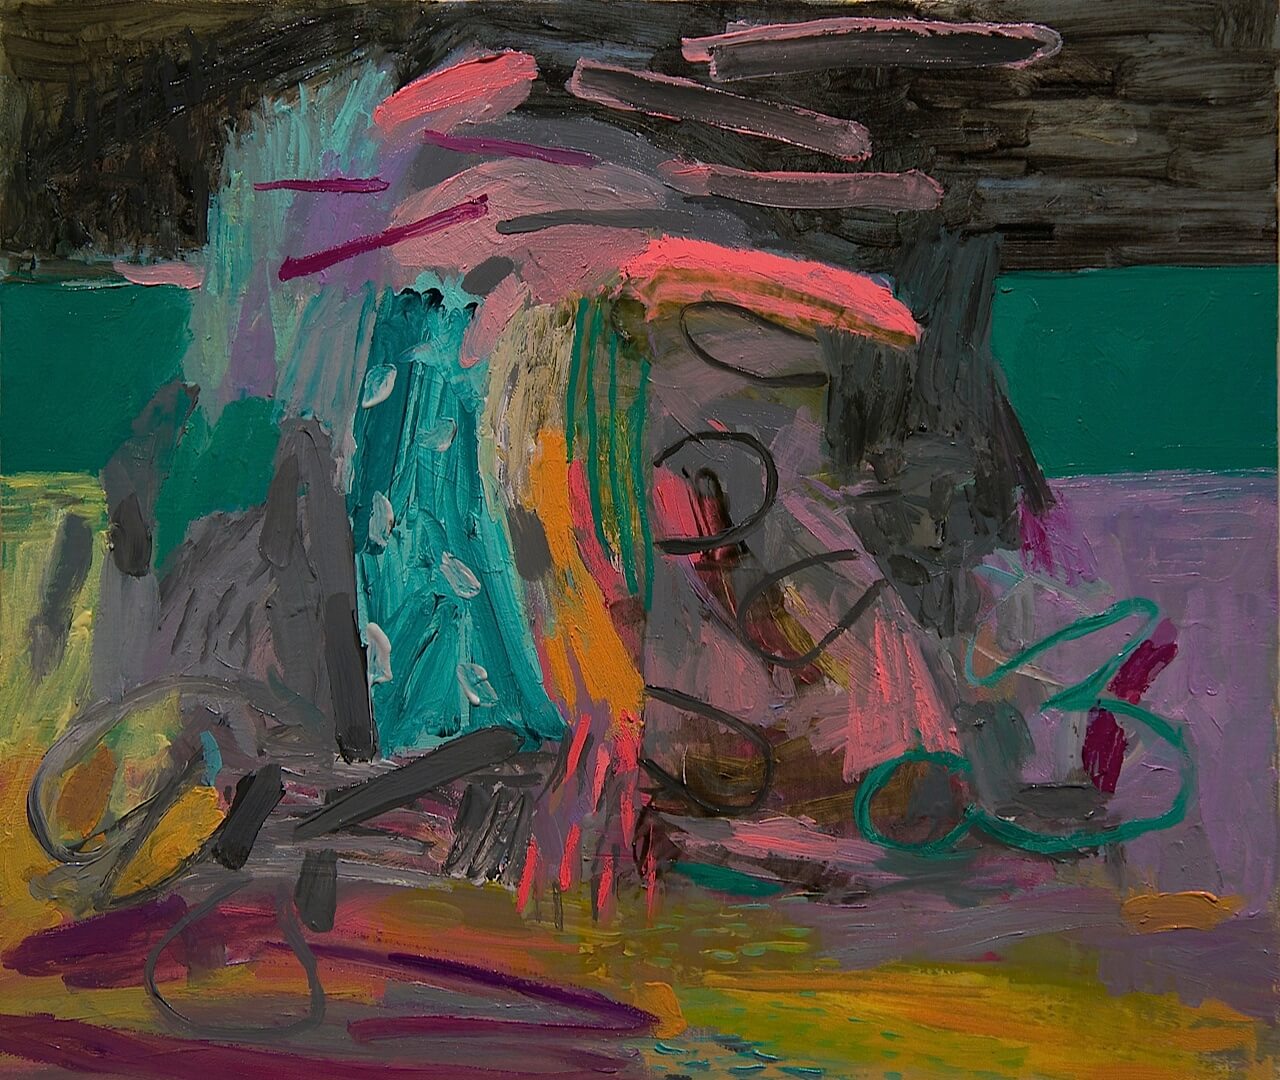 Alfredo Gisholt, Untitled, oil on canvas, 14 x 16 inches, 2014 (courtesy of the artist)